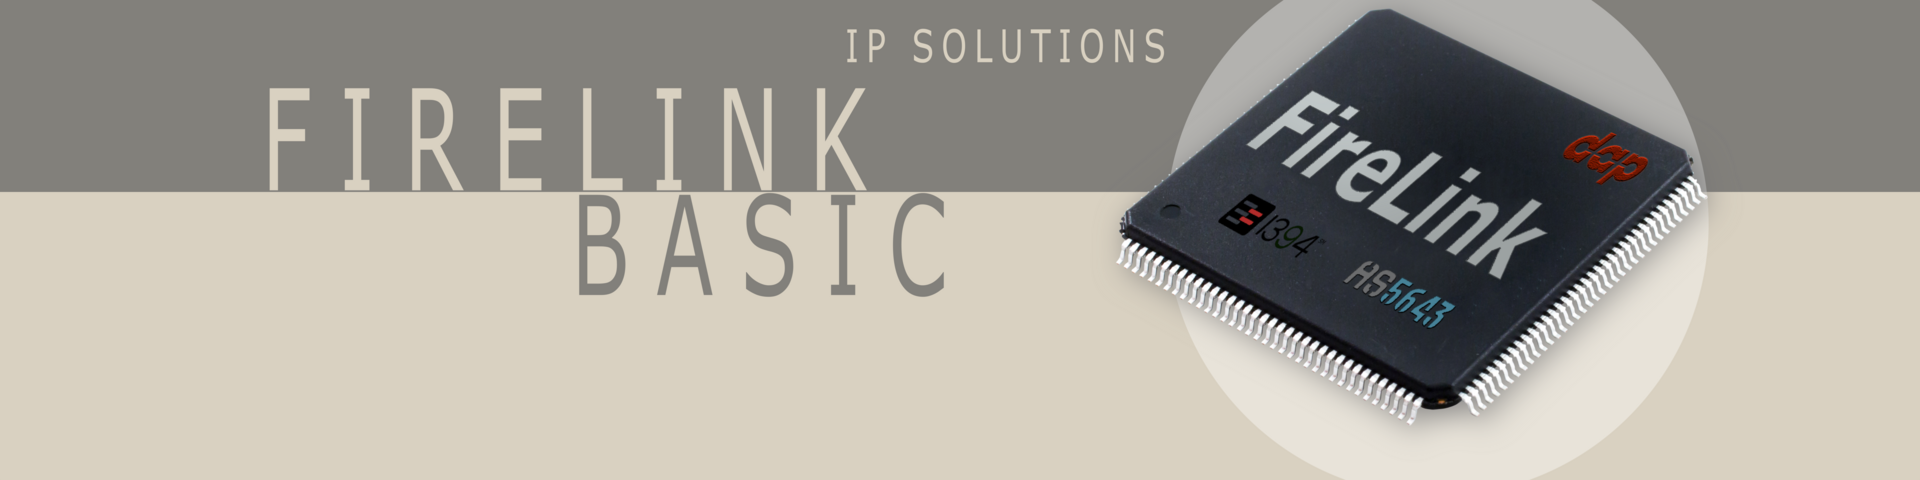 1394 and AS5643 IP Core solutions - FireLink Basic